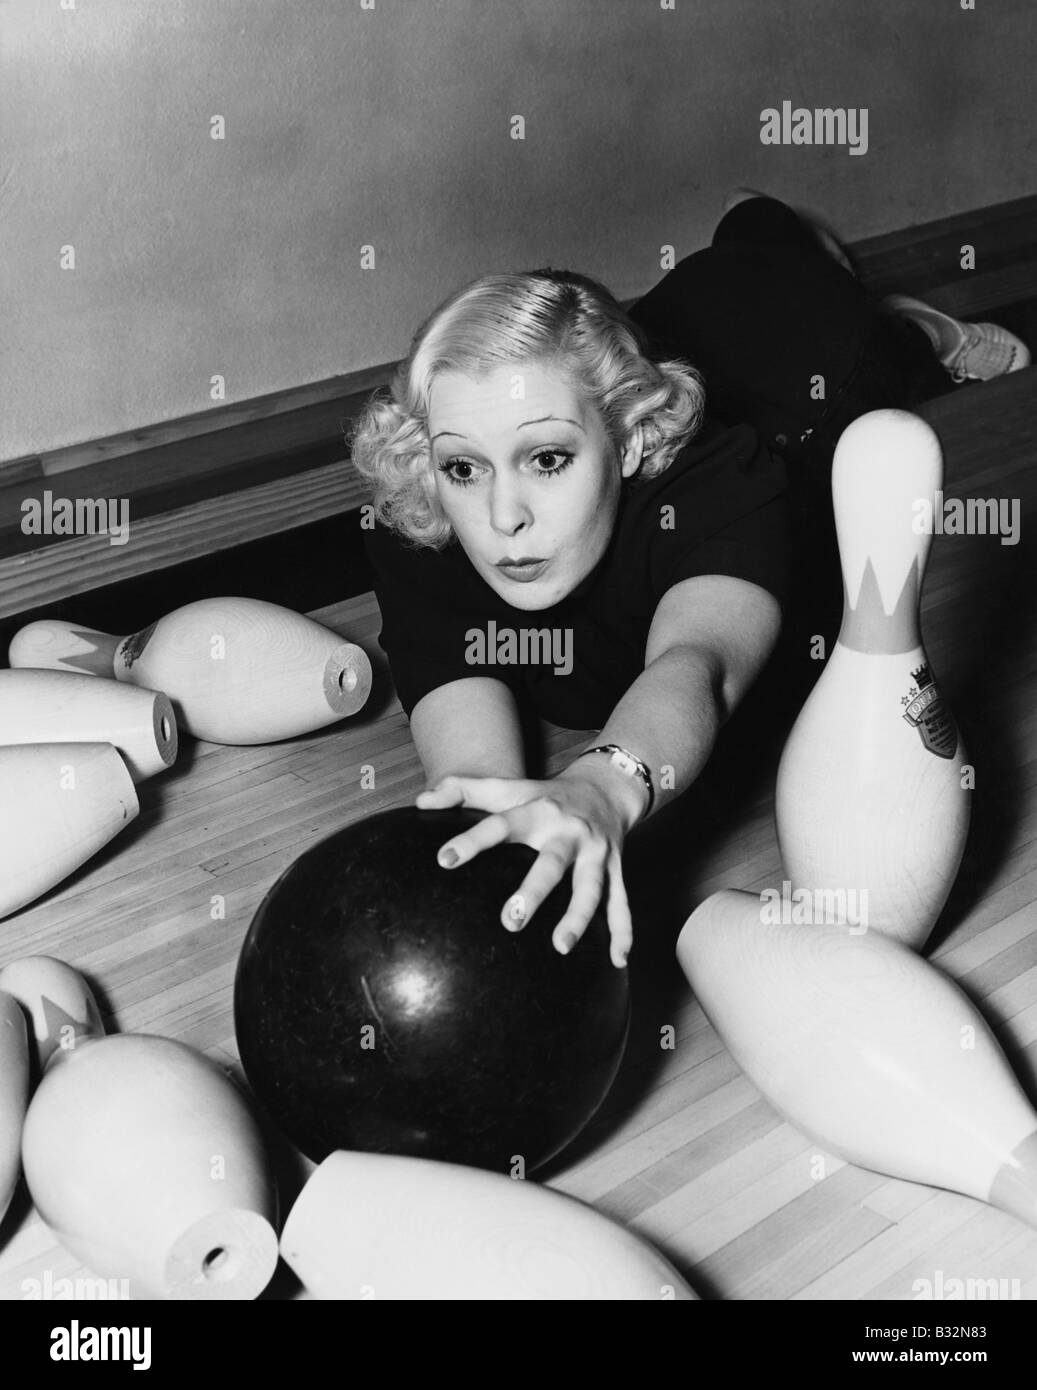 Woman having bowling accident Stock Photo